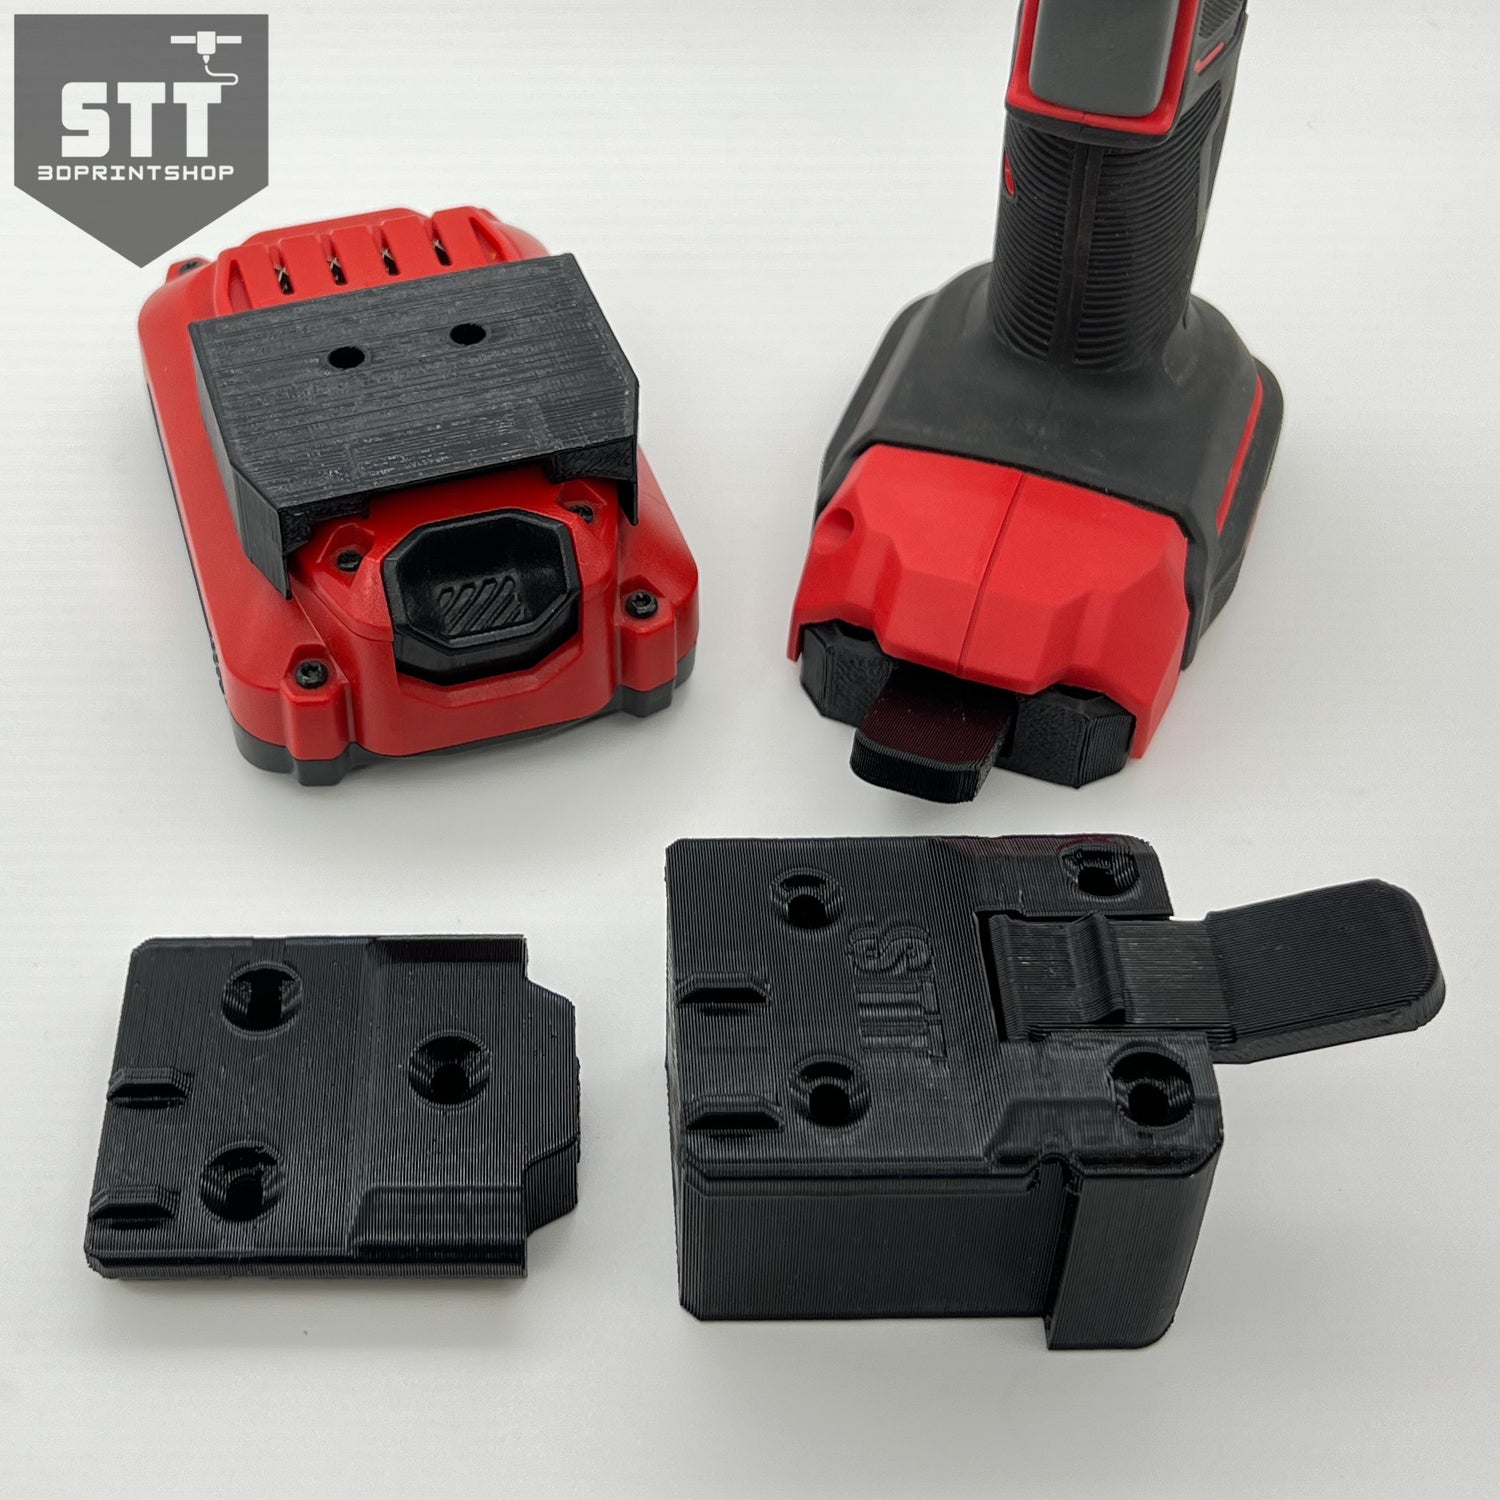 Craftsman V20 Tool And Battery Holders